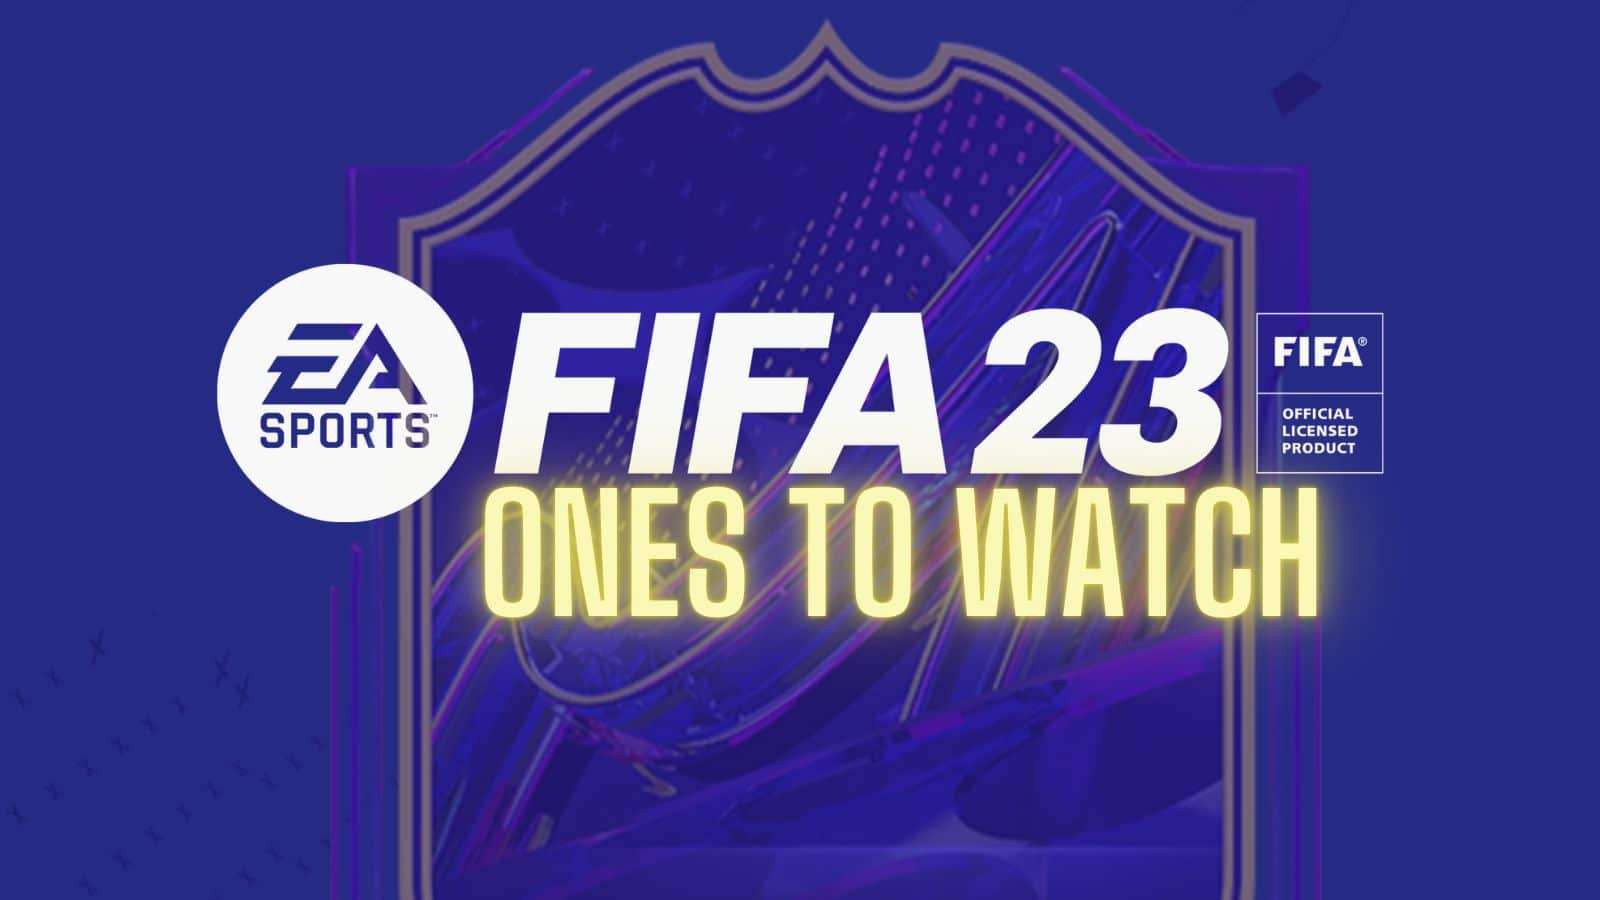 FIFA 23 Ones to Watch